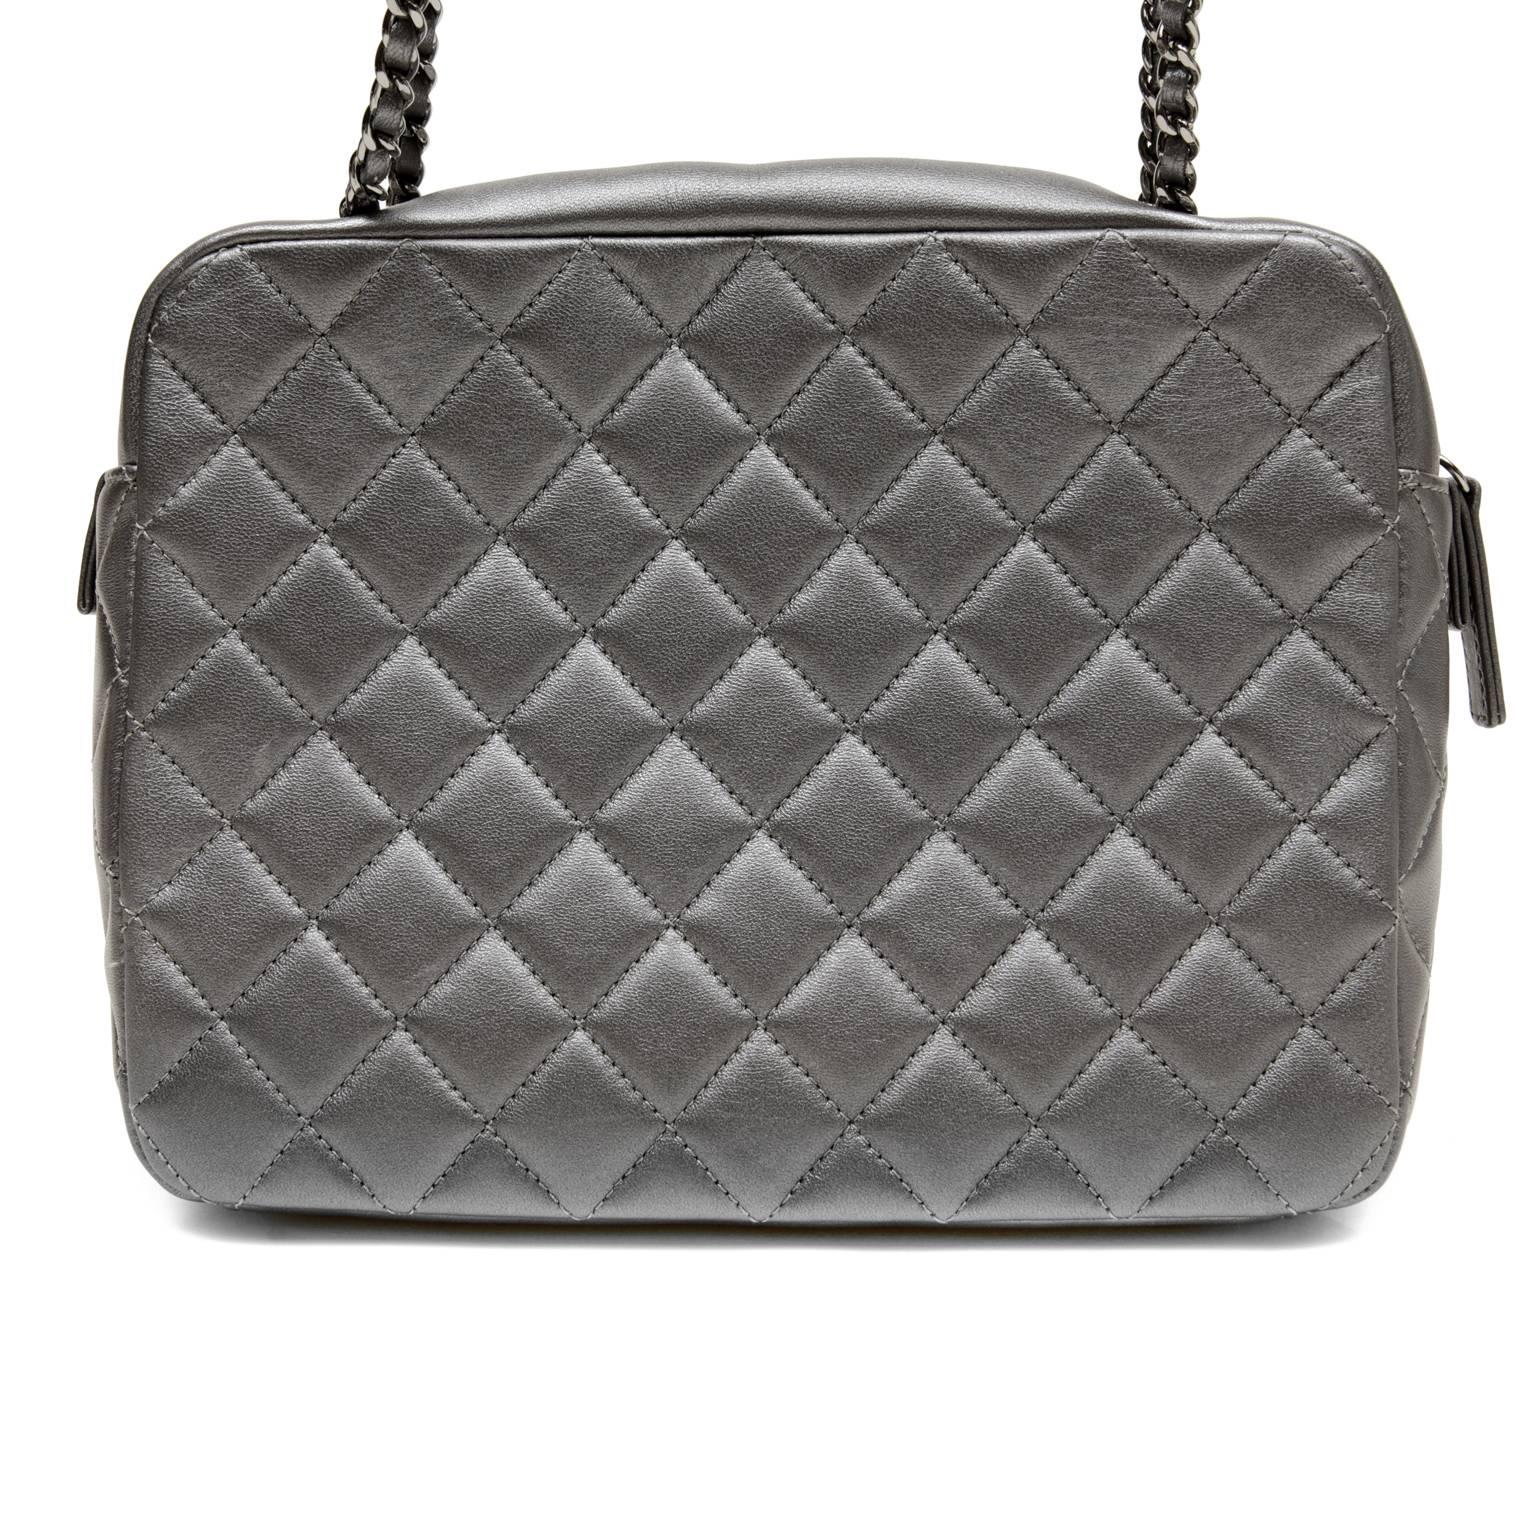 Chanel Evening Art Flap Bag- PRISTINE
Runway Spring 2014 collection  
 Very unique, the camera case style may be carried cross body or on the shoulder and works with nearly every color.  
Dark metallic pewter leather is quilted in signature